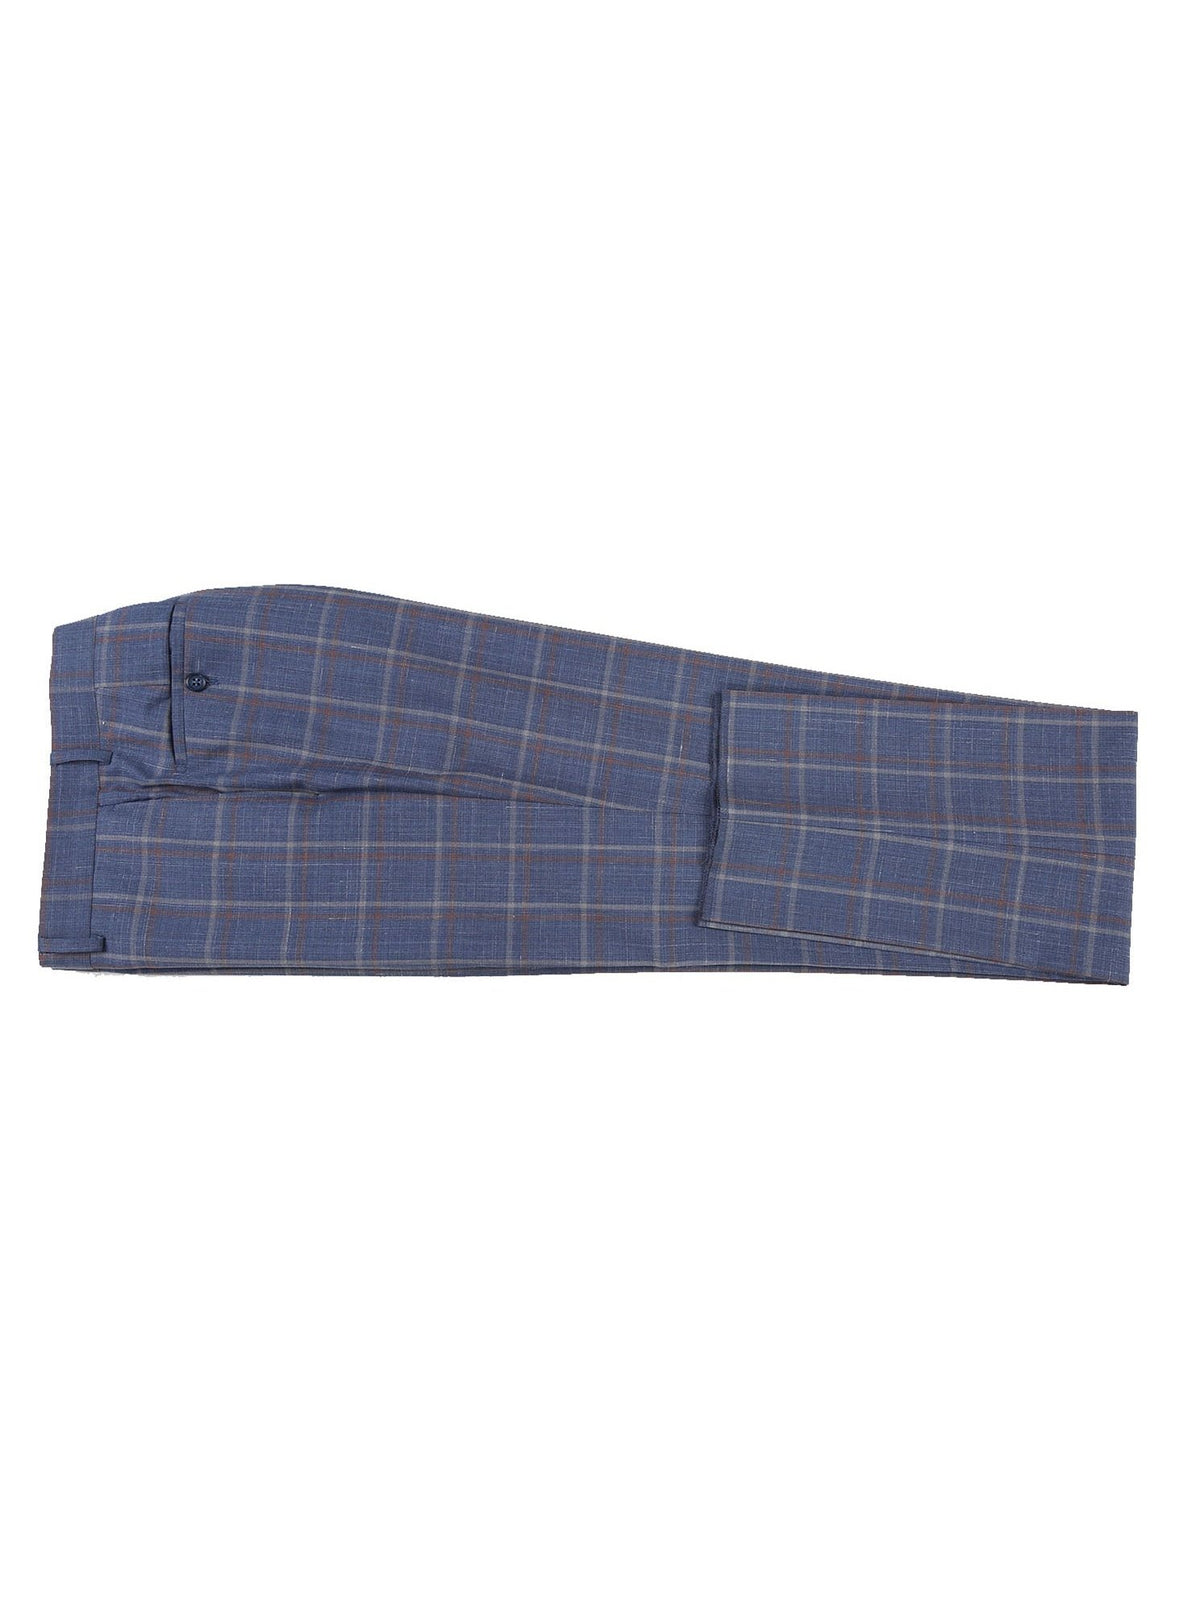 English Laundry Slim Fir Light Steel Blue with Orange Check Wool Suit